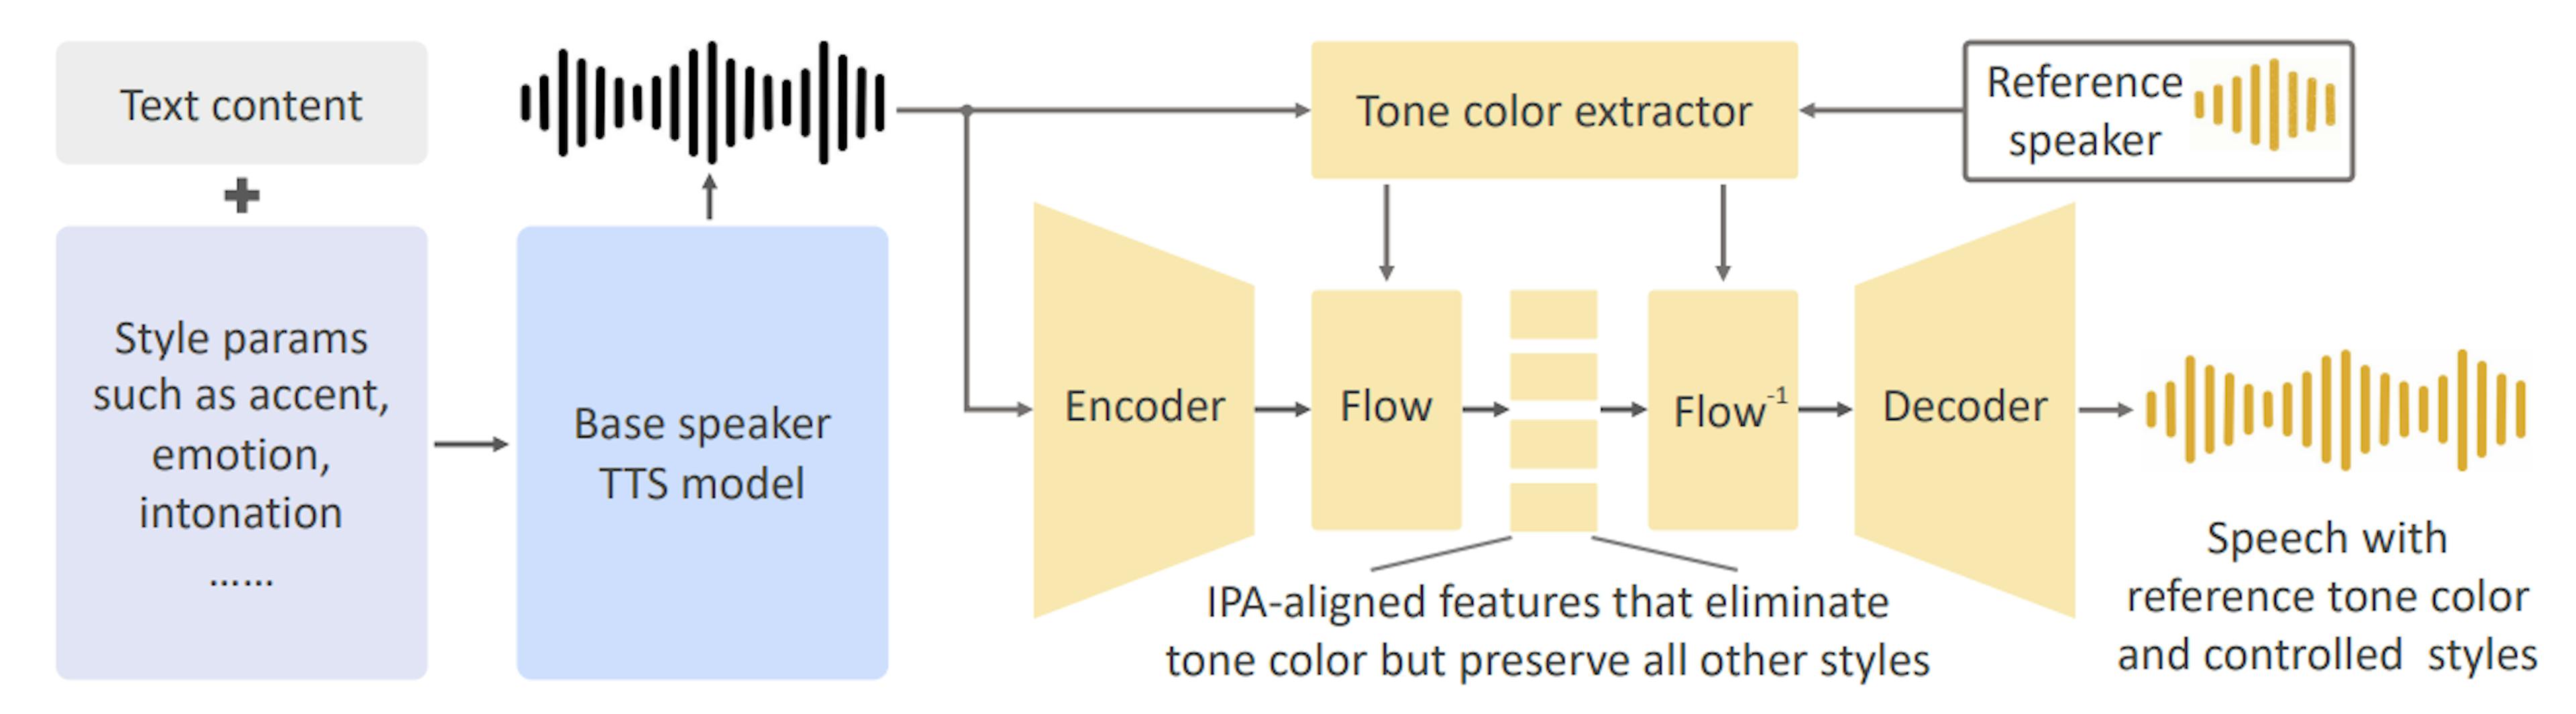 Figure 1: Illustration of the OpenVoice framework. We use a base speaker model to control the styles and languages, and a converter to embody the tone color of the reference speaker into the speech.